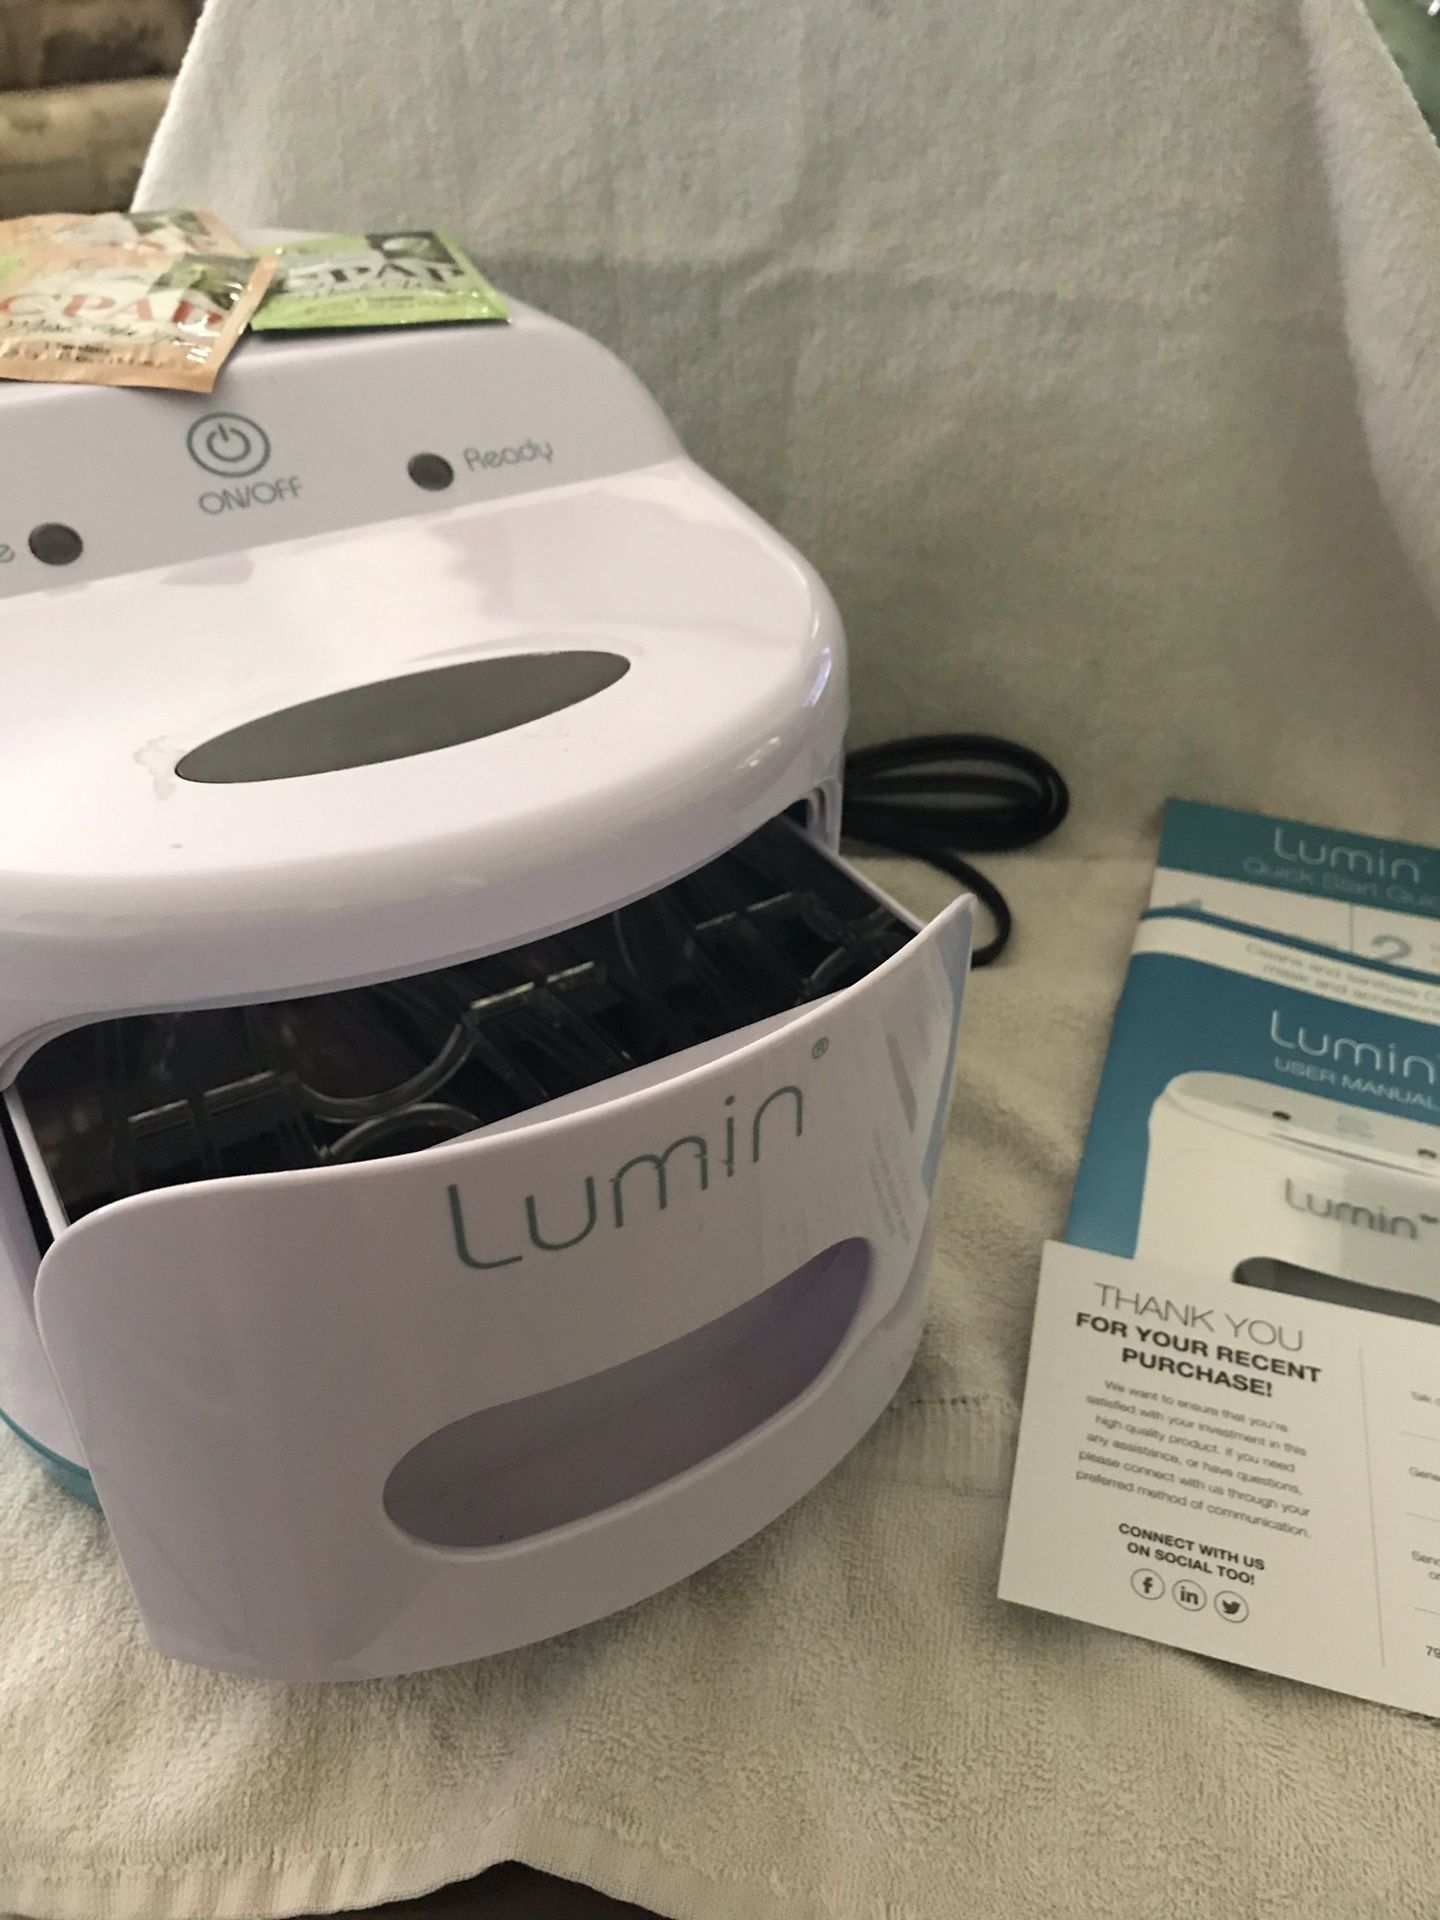 CPAP cleaning machine. Never used